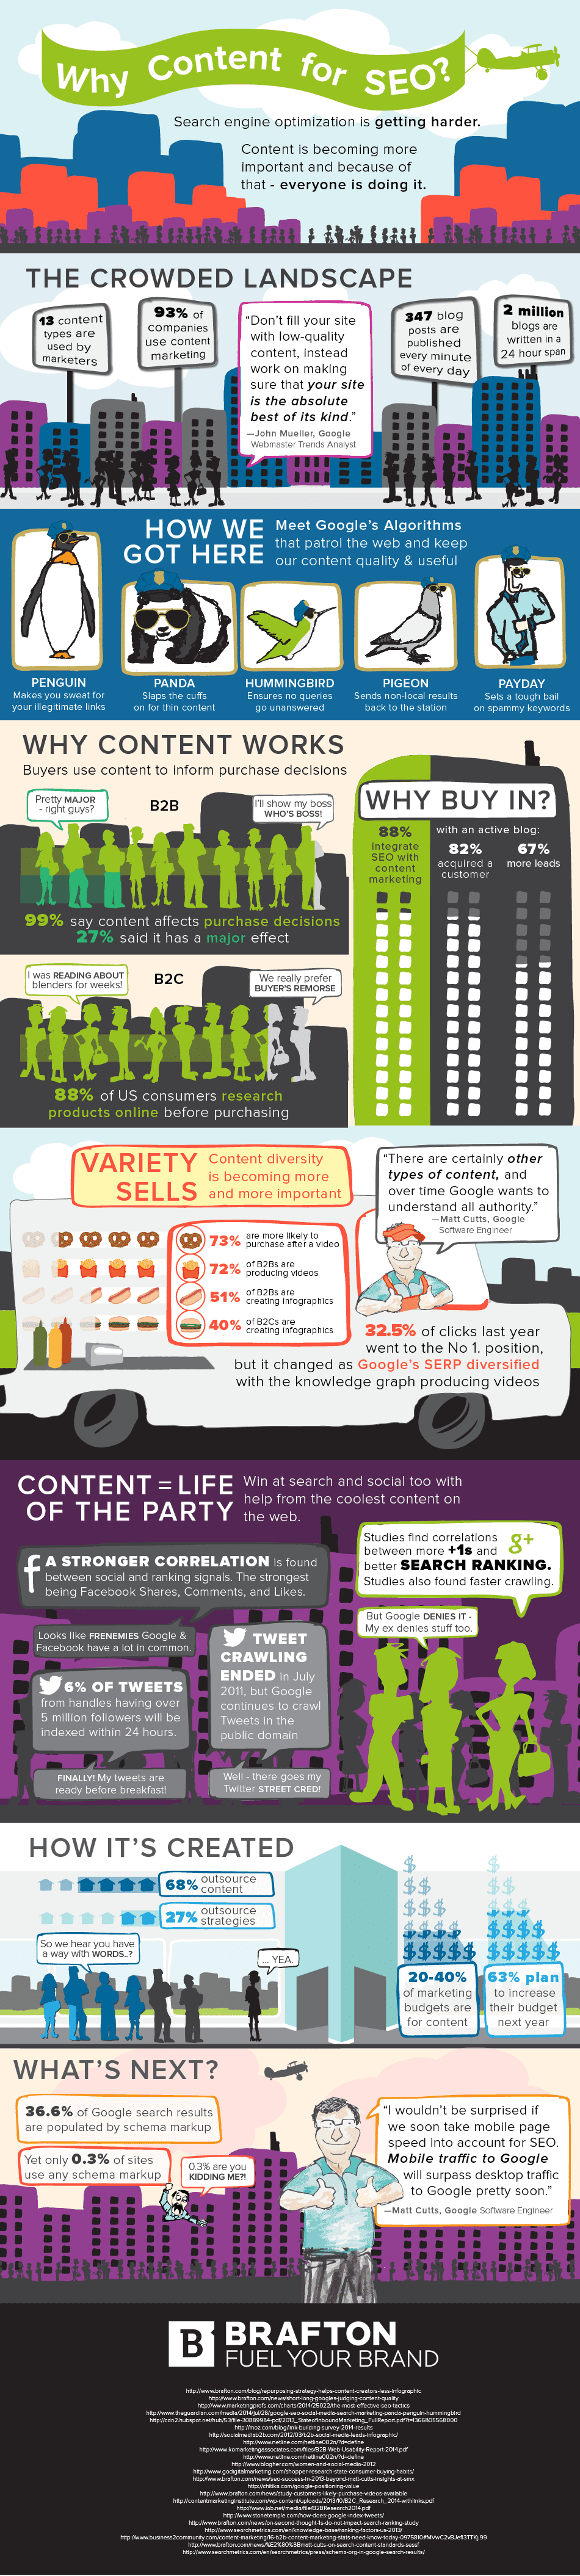 infographie-contenu-referencement-seo